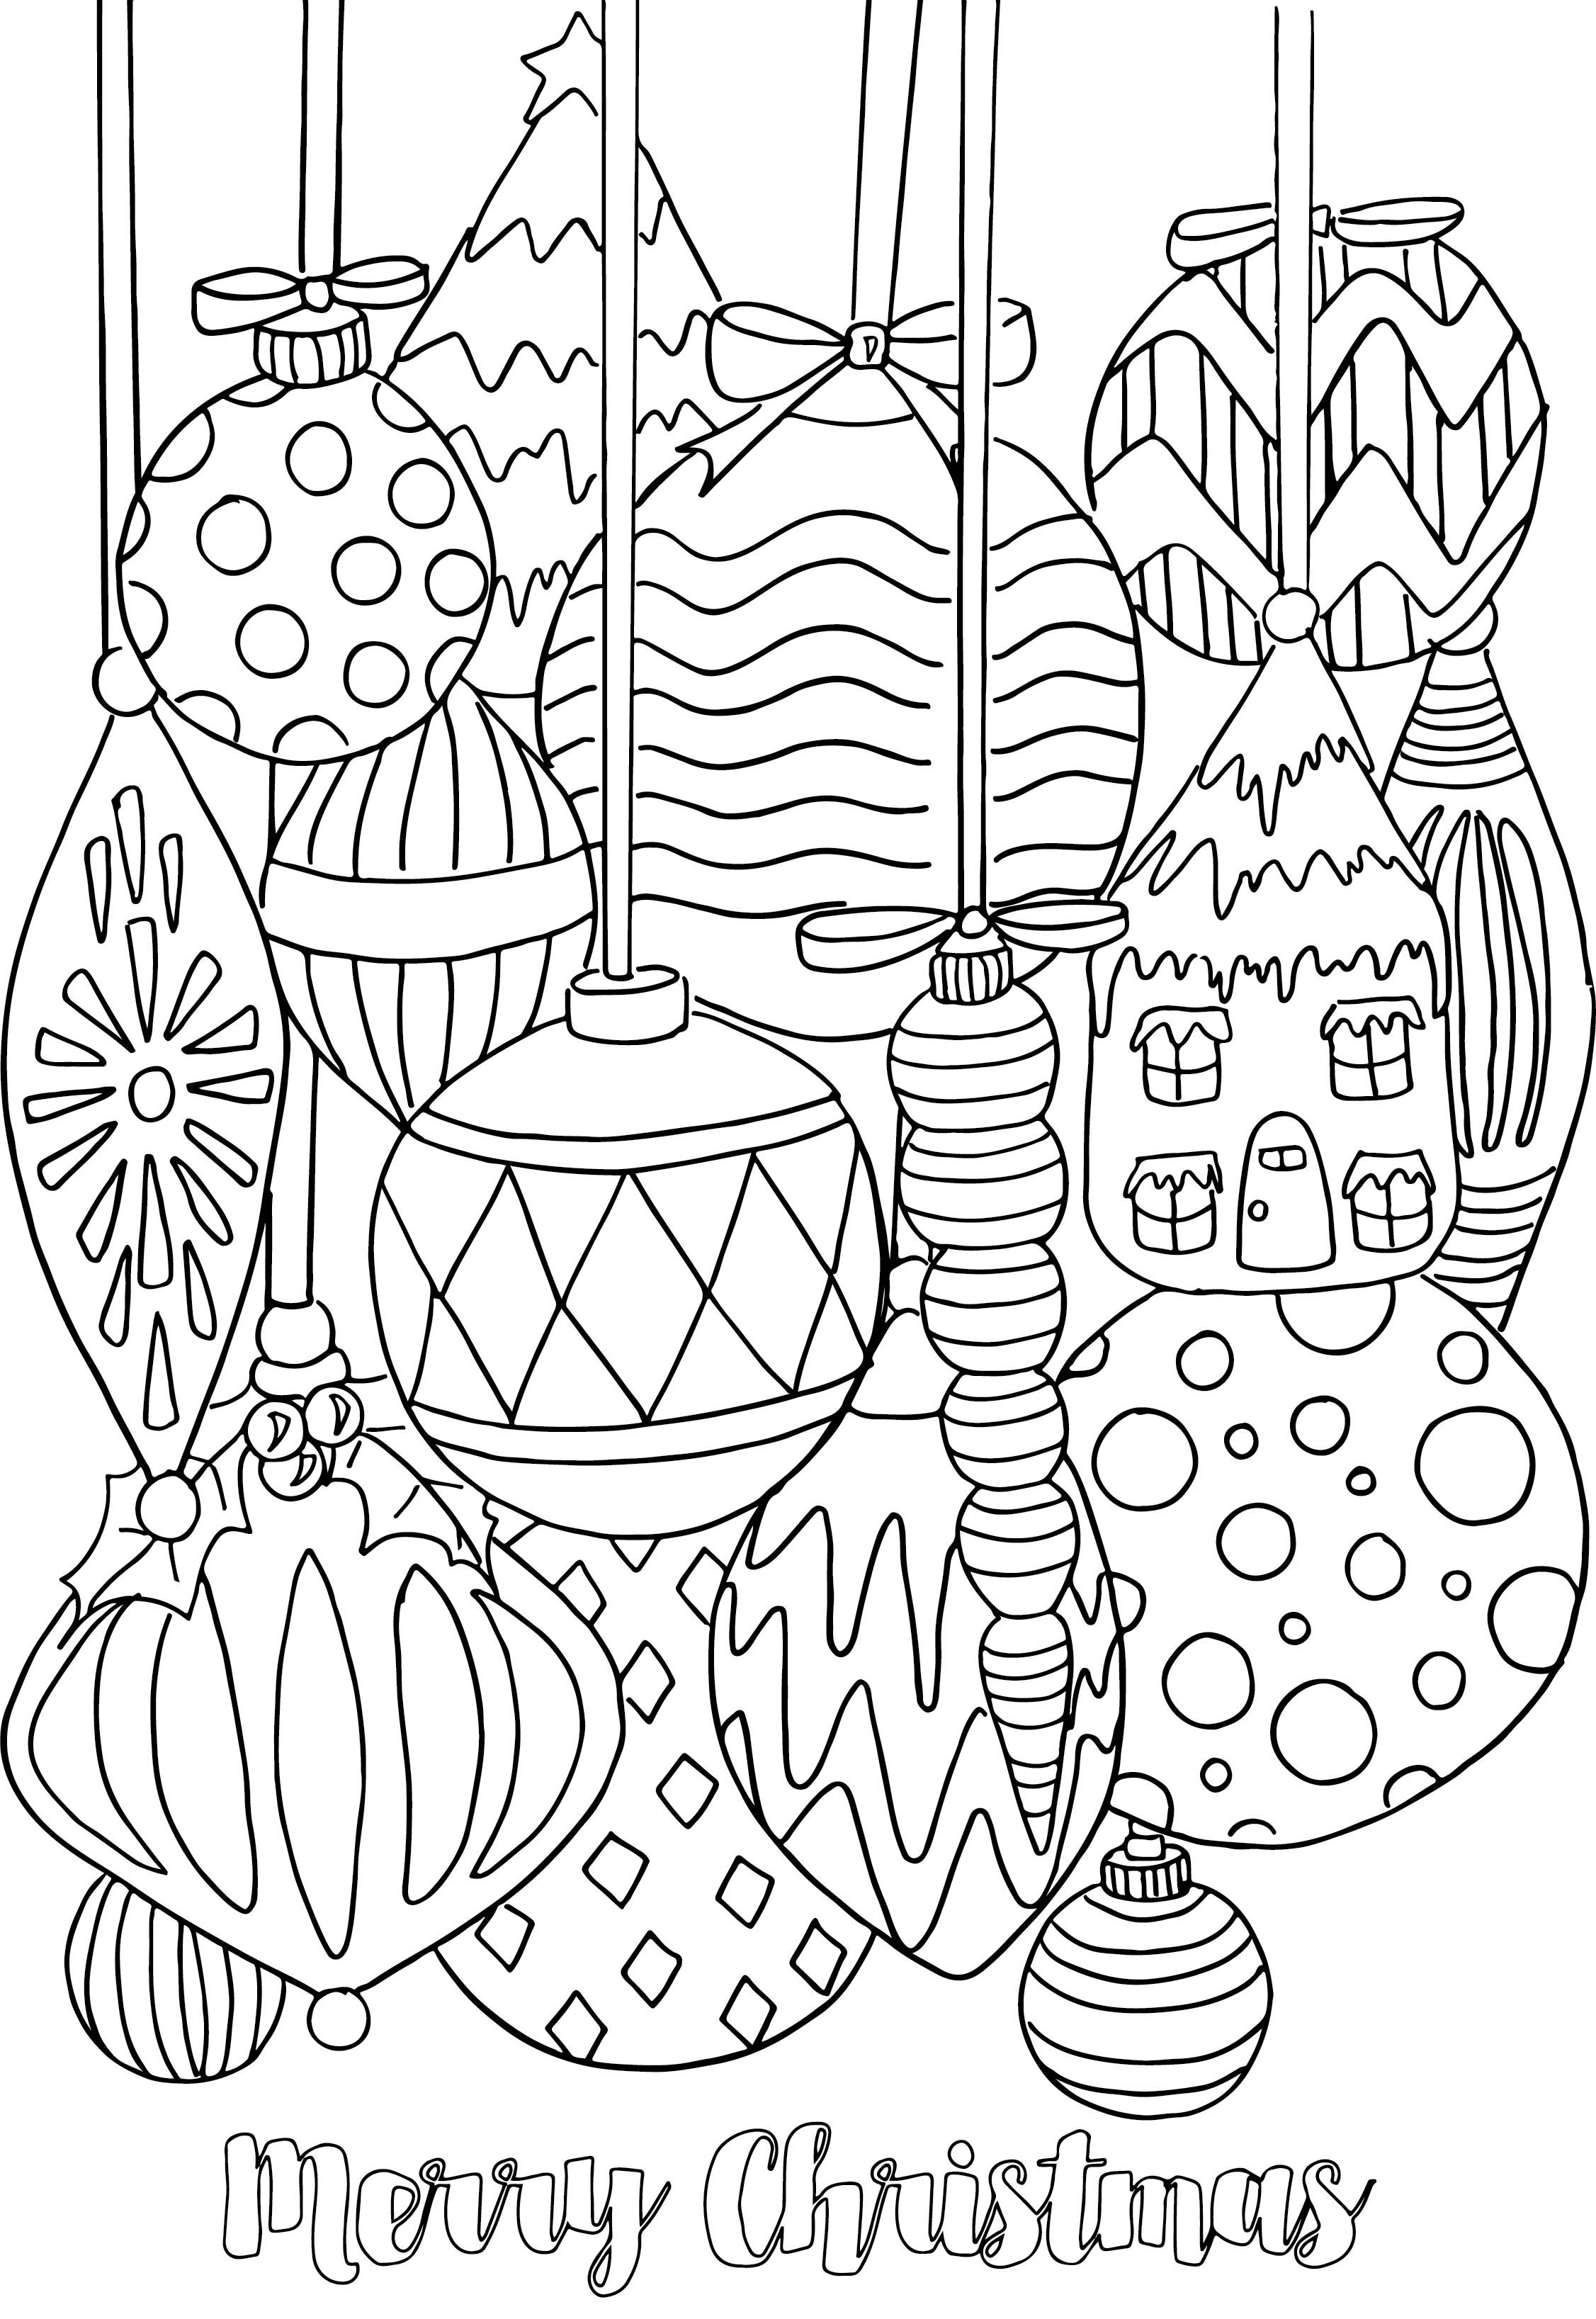 20 Best Free Christmas Printable Ornament Coloring Pages ...